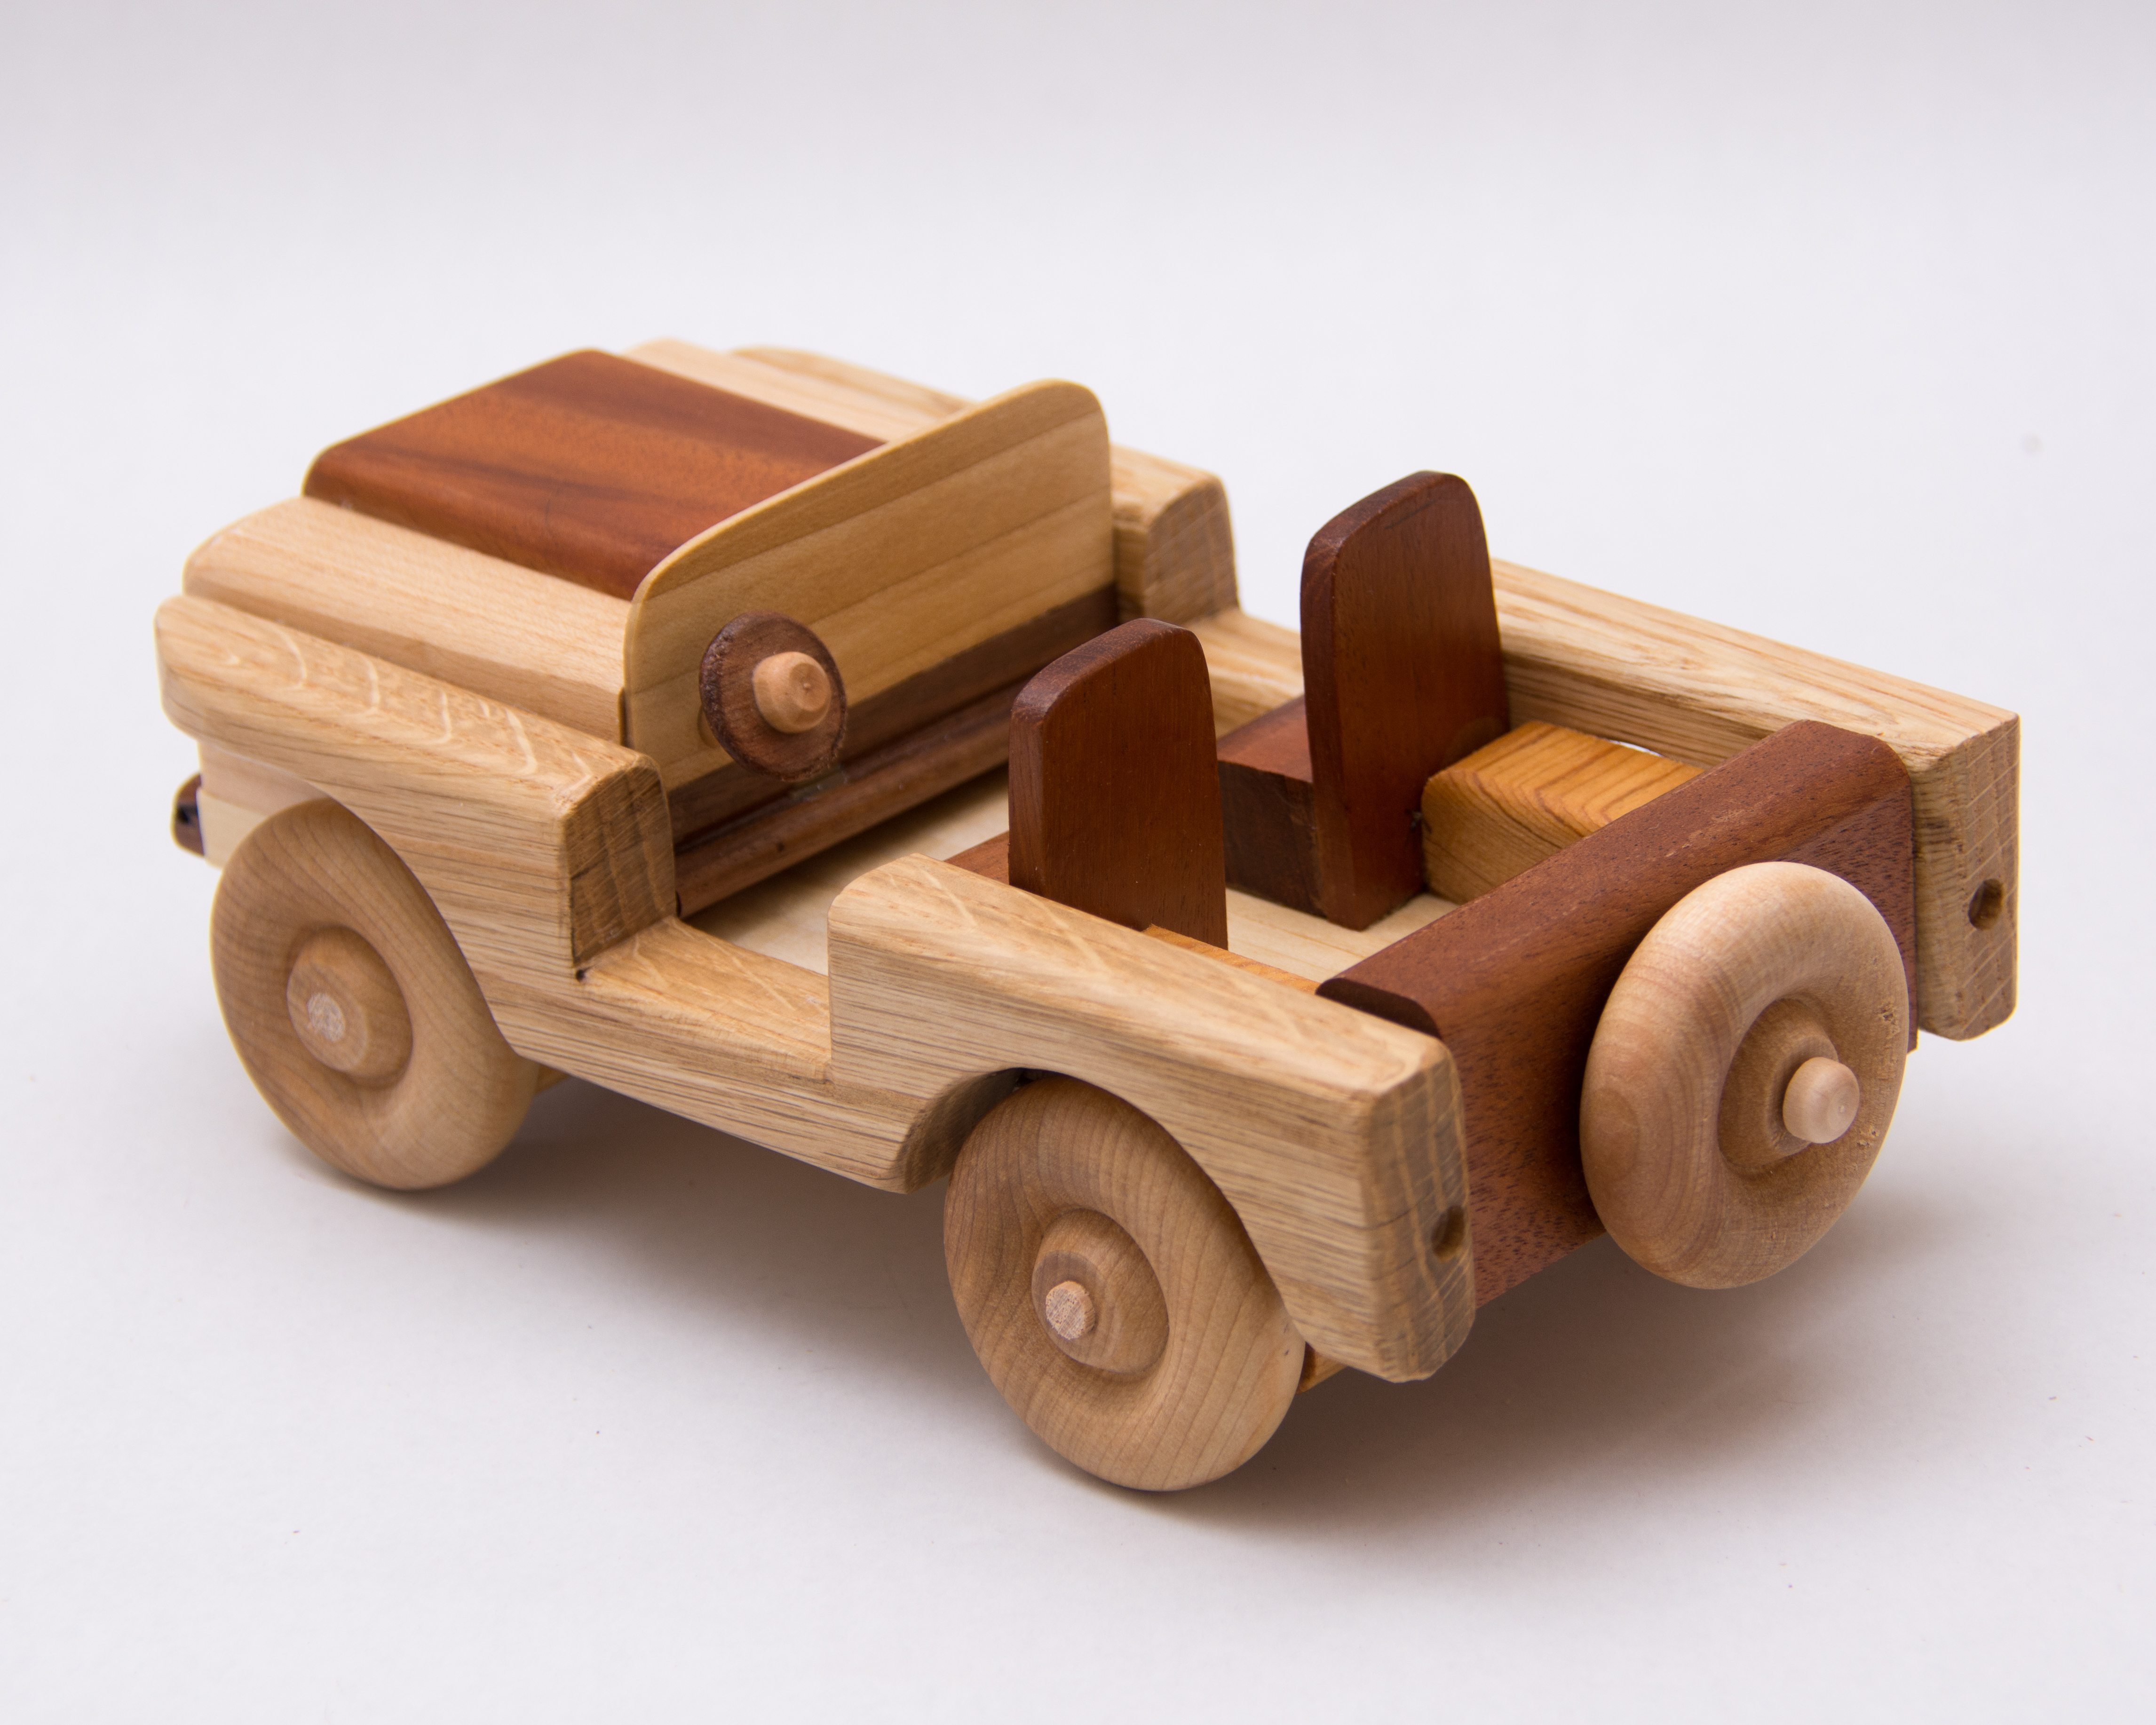 4by4 (J0010) Handmade Wooden Toy Off Road Vehicle / Car by Springer Wood  Works